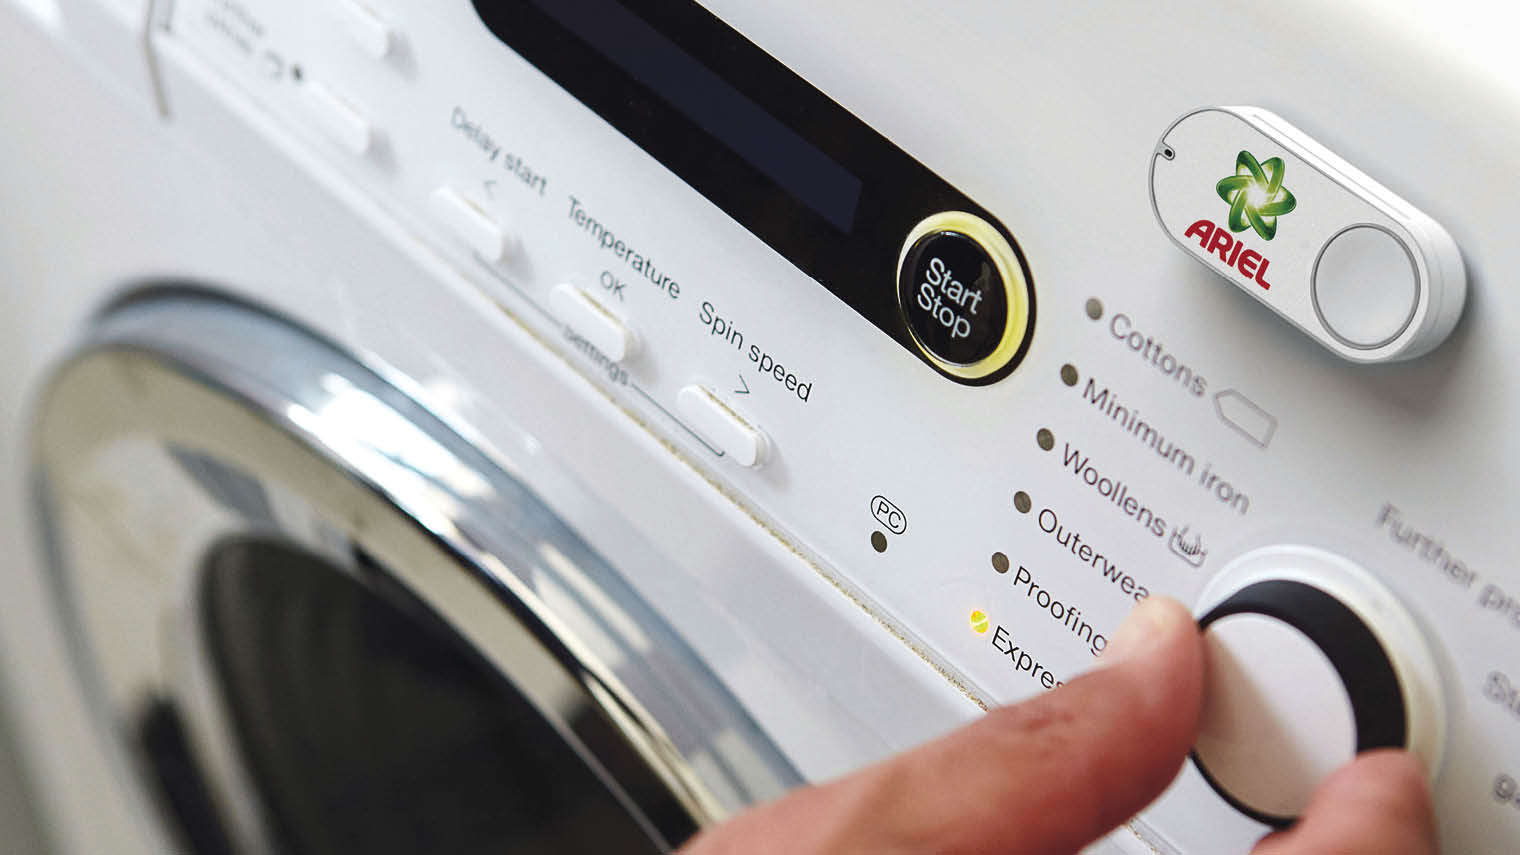 Amazon’s Dash buttons are wi-fi connected devices to reorder products at a place convenient to the customer